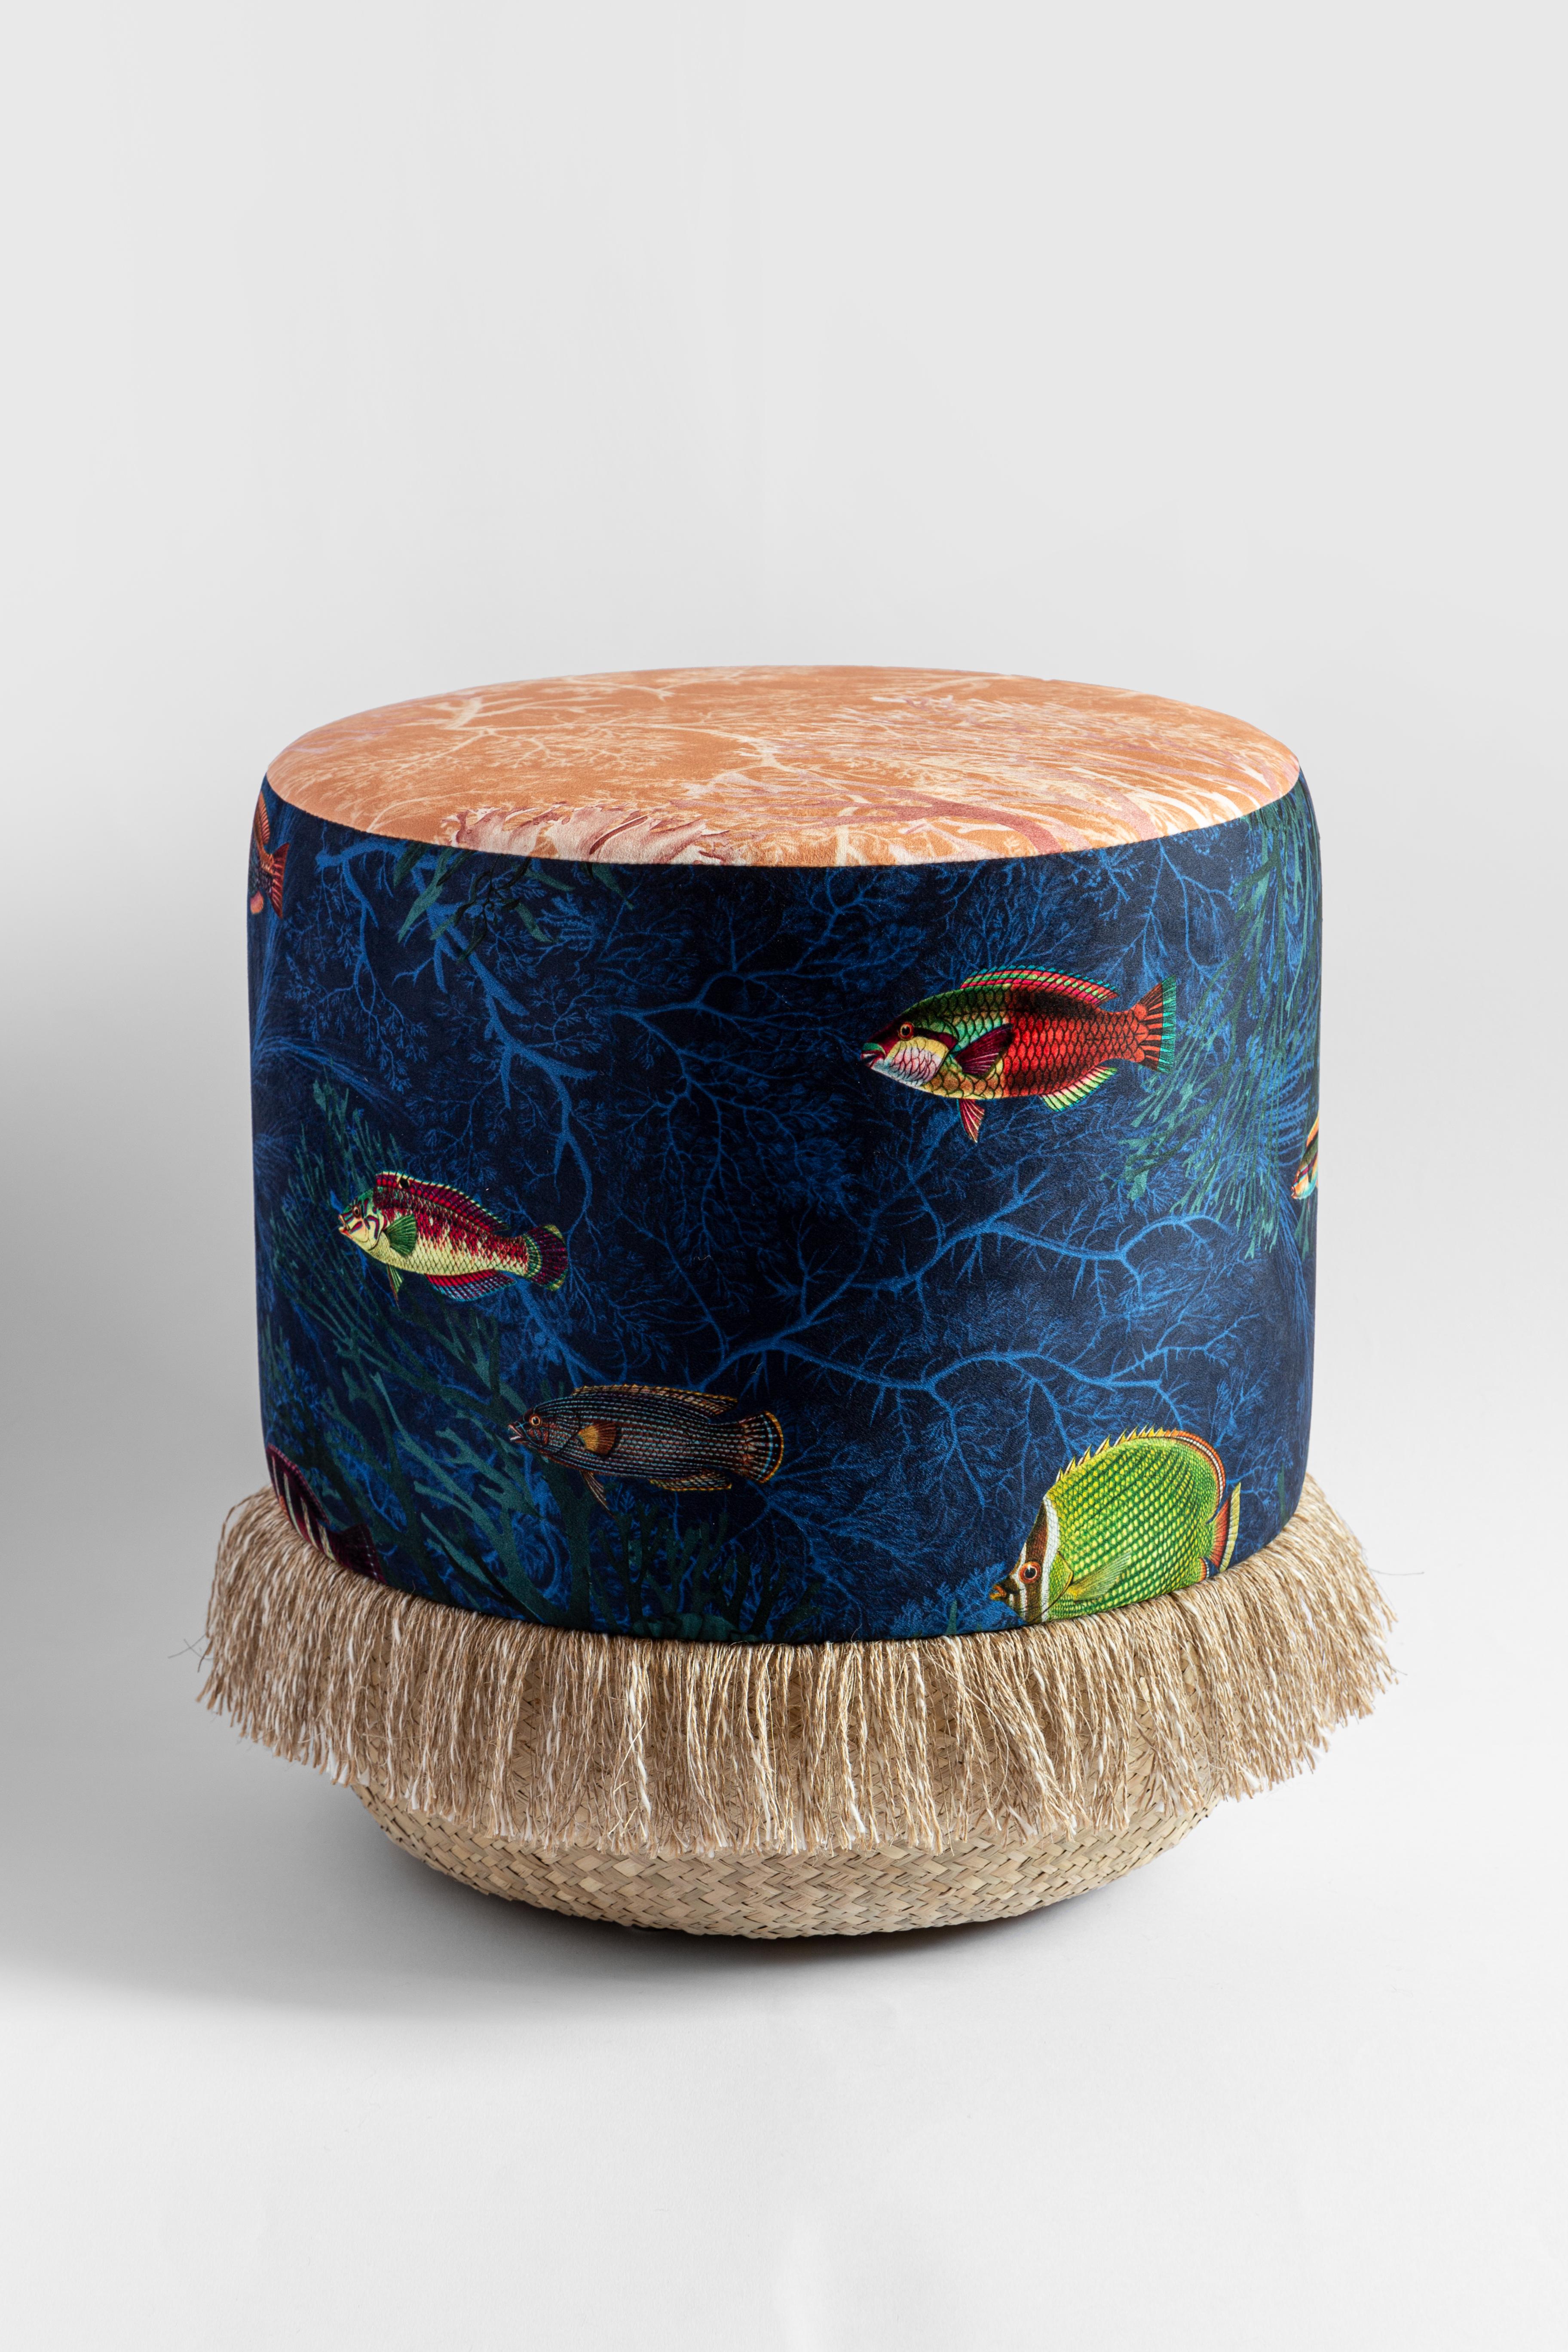 Pouf handmade by Italian expert craftsmen. High quality straw base and printed velvet covering.
The tropical fish of the Amami islands play around the surface of this pouf.